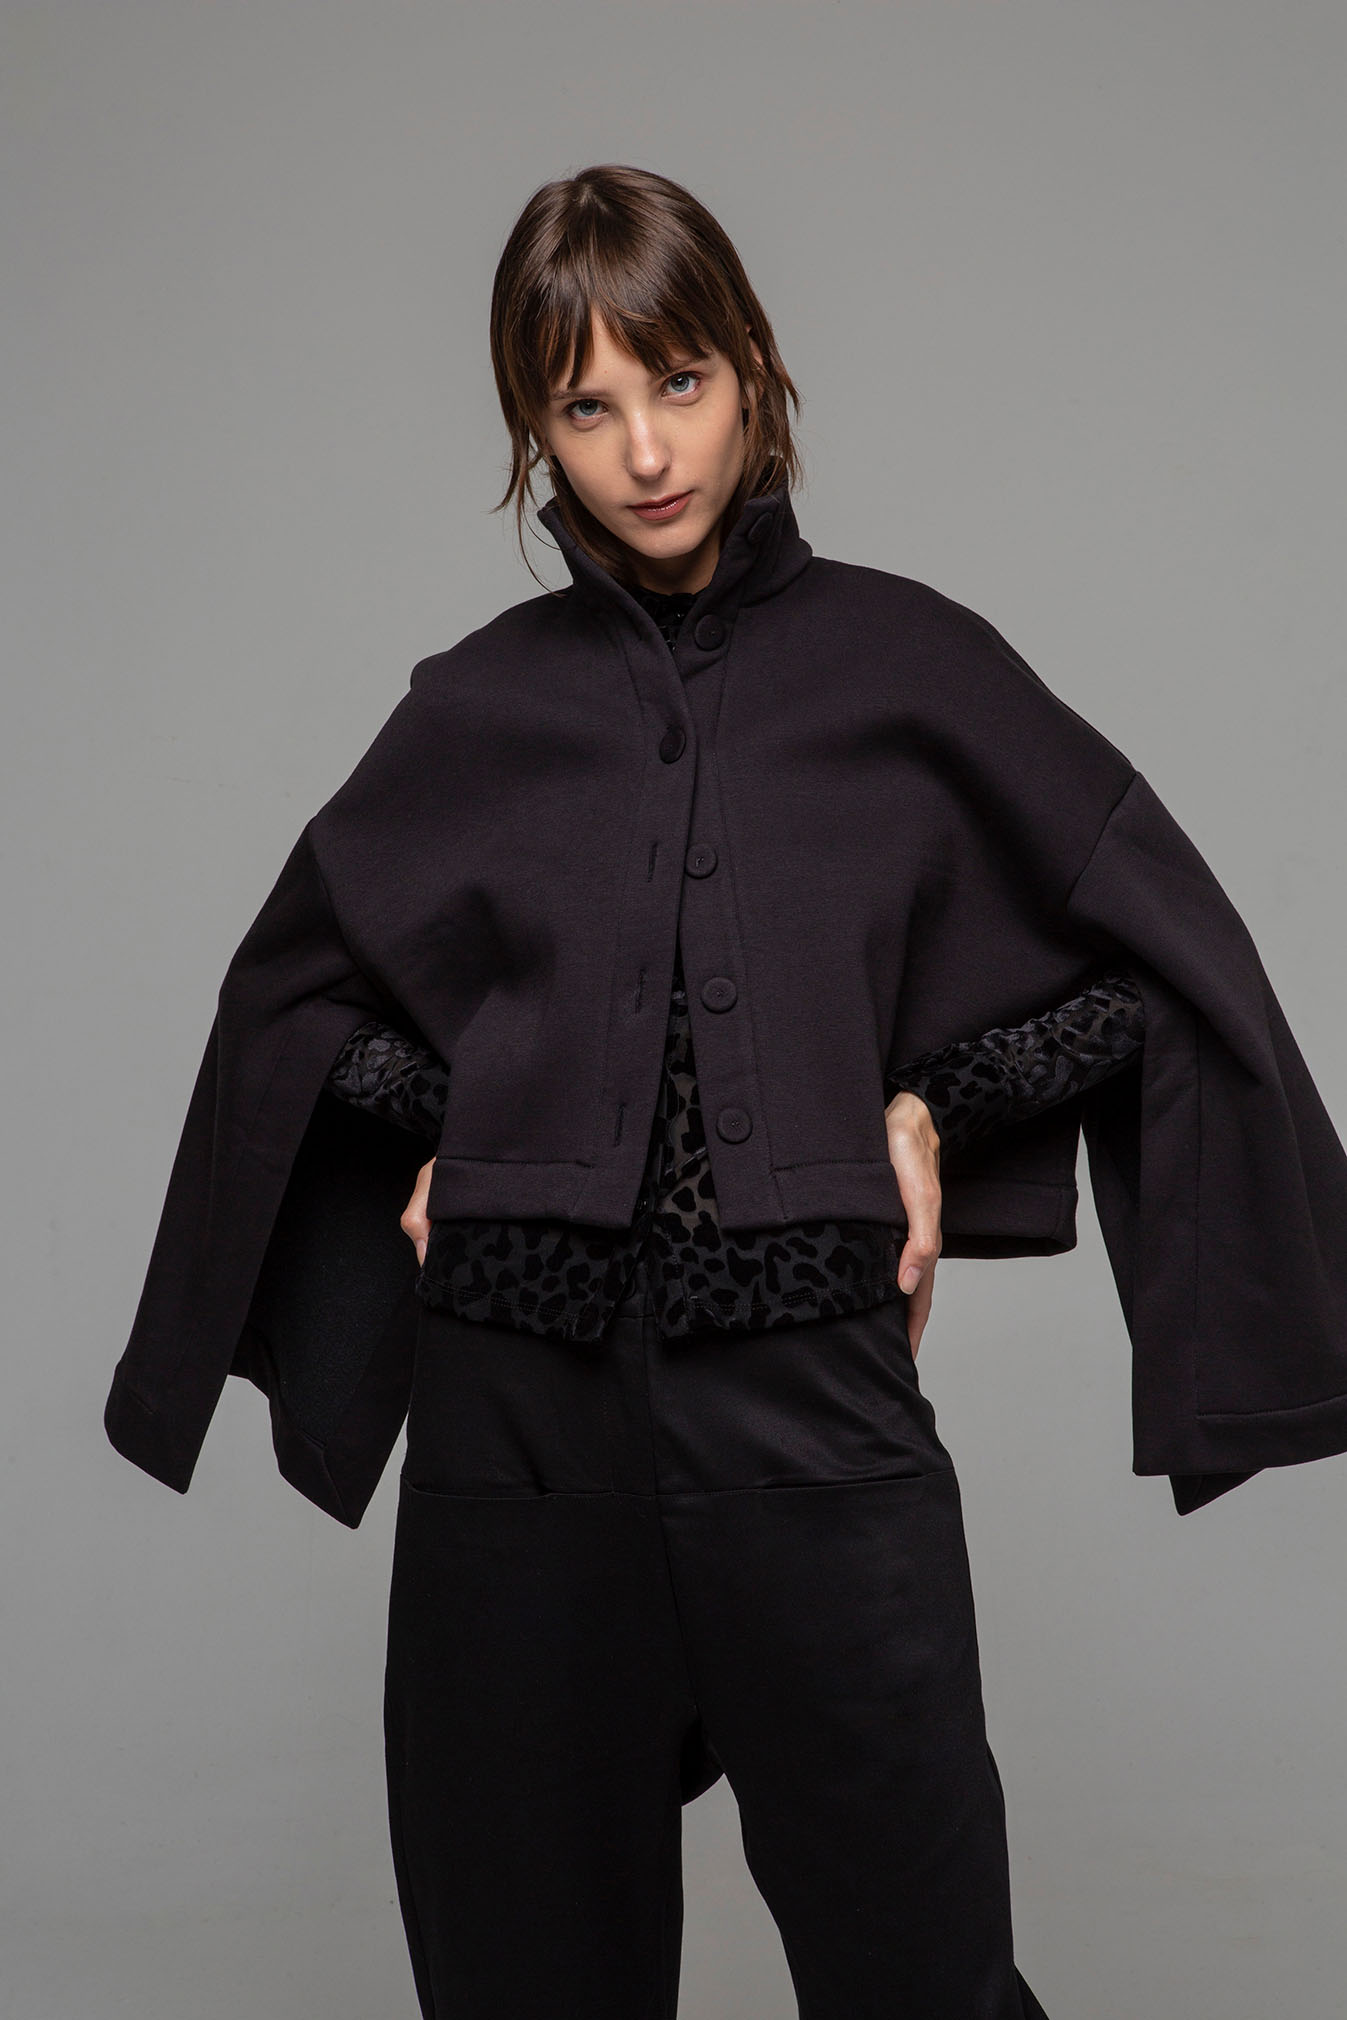 Women's Jersey Cape by Noble Athens